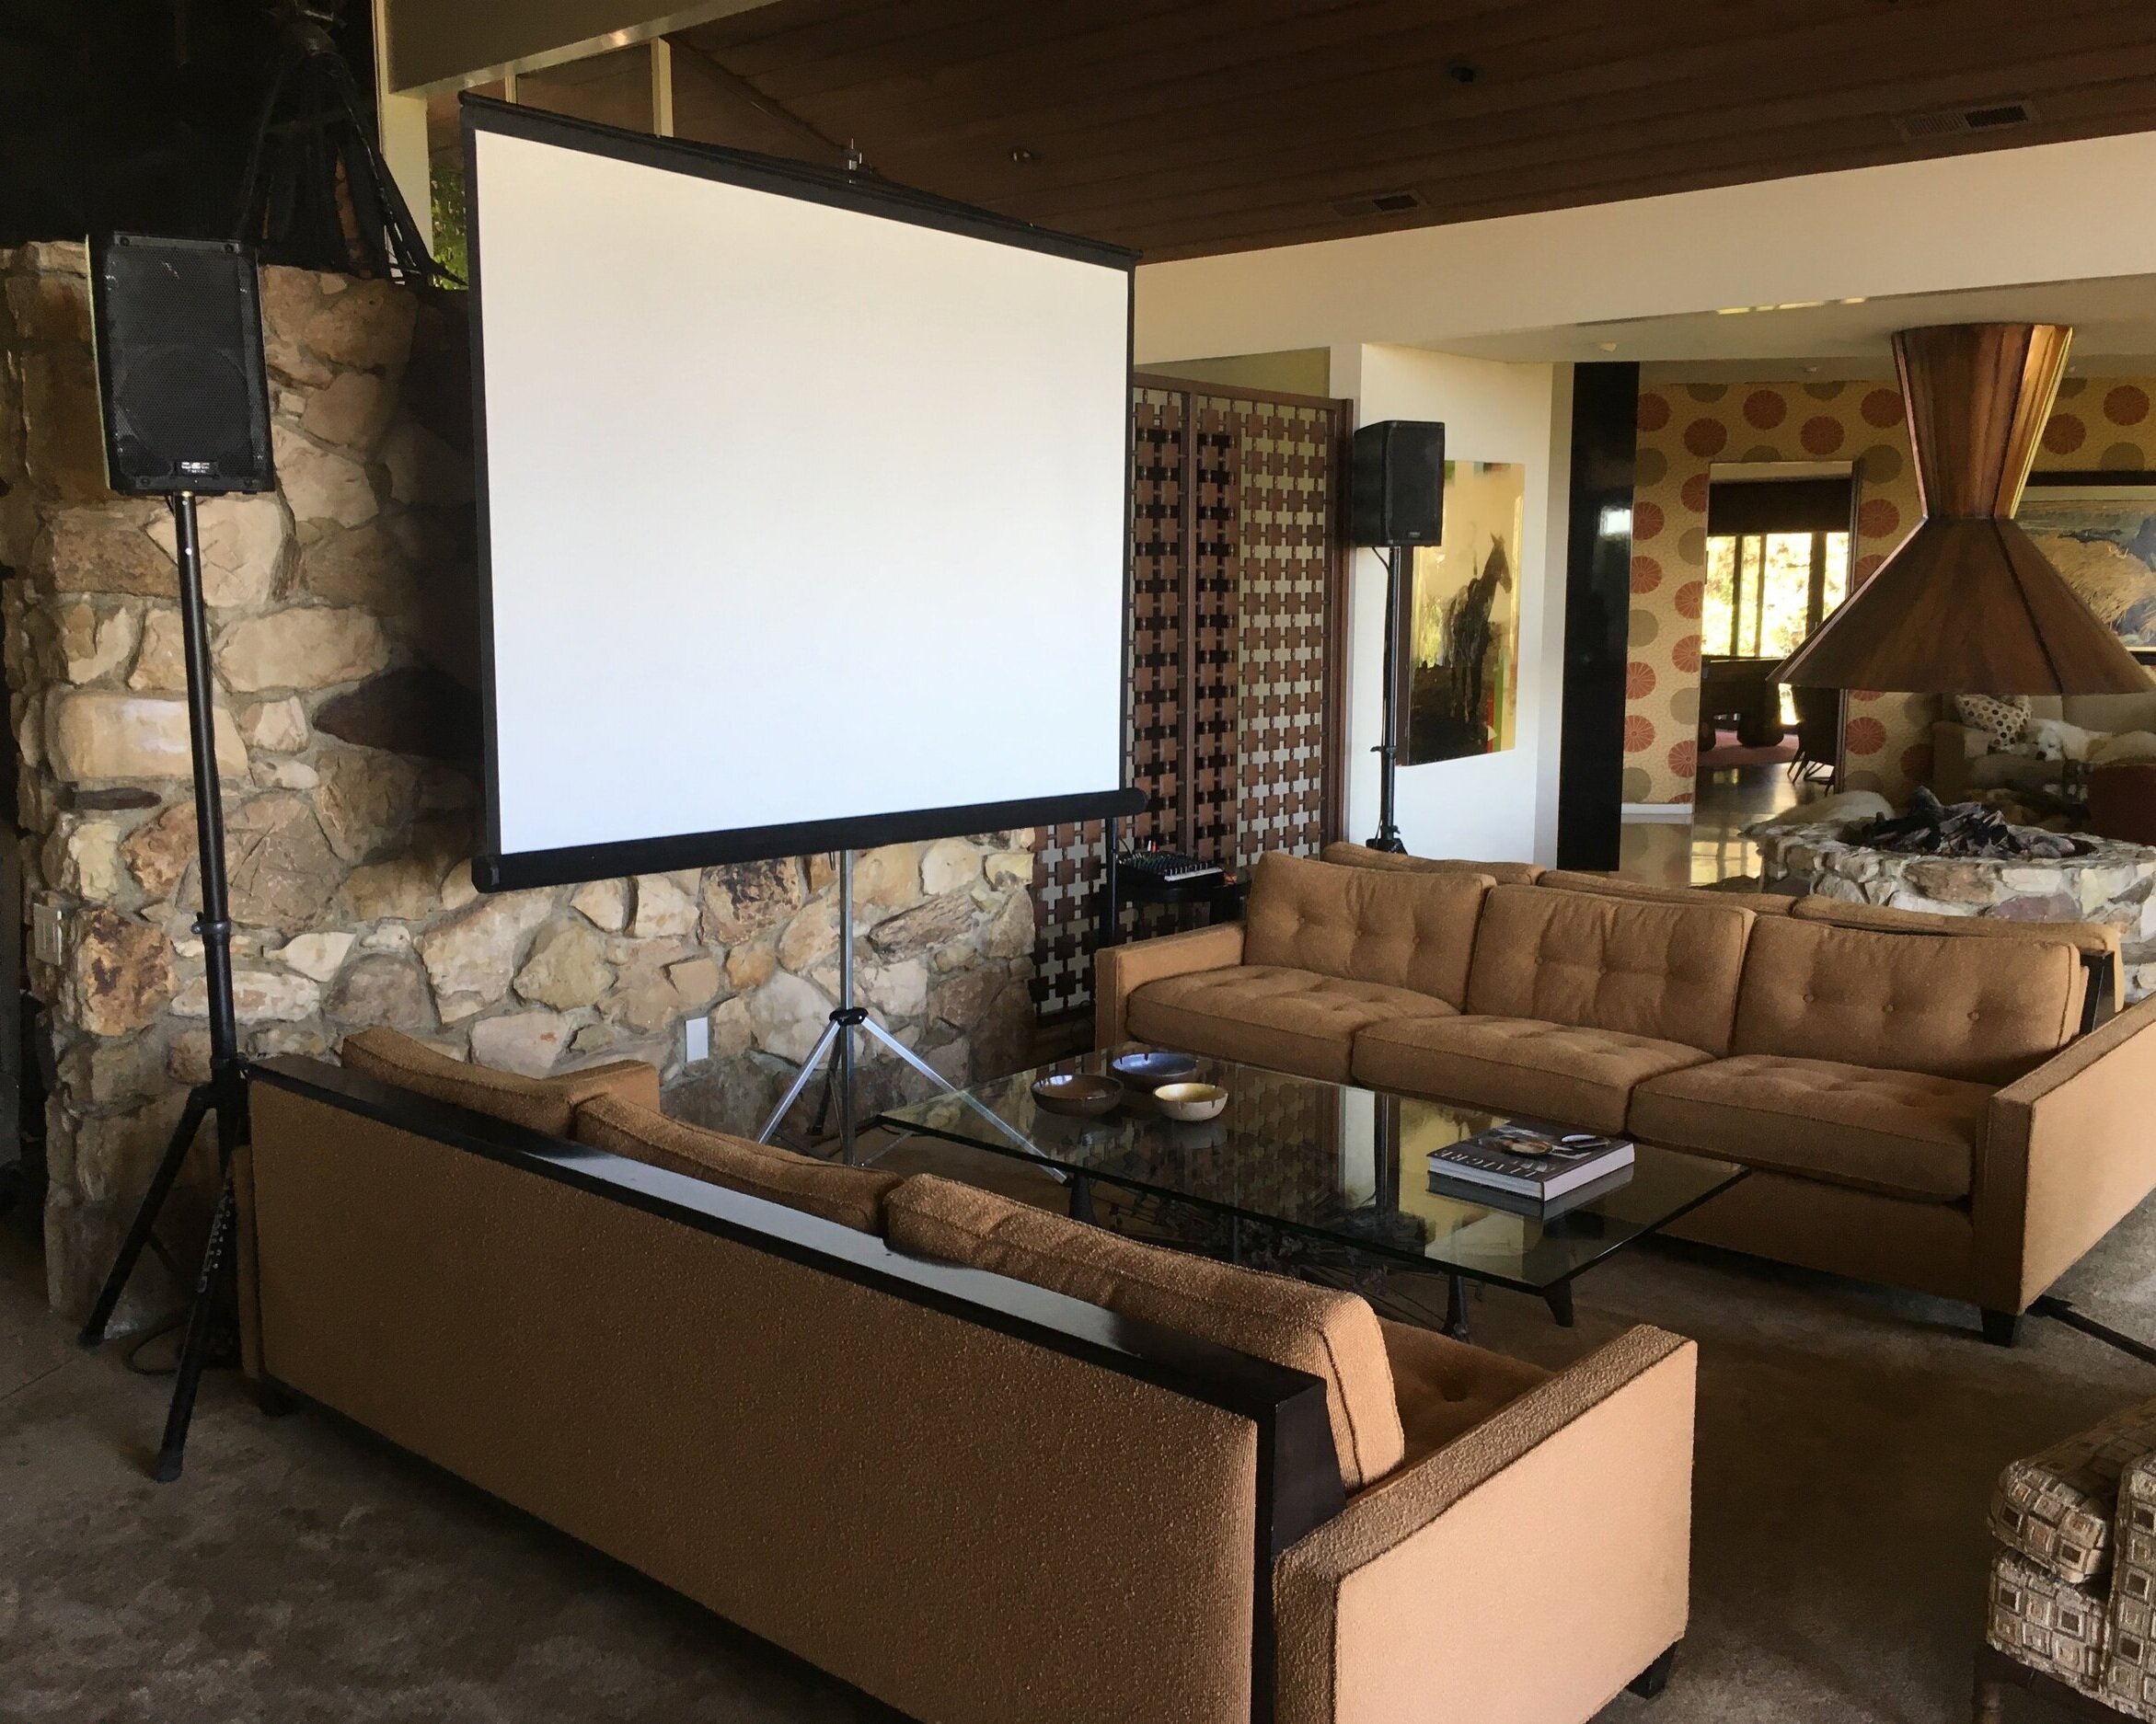 7FT TRIPOD PROJECTION SCREEN